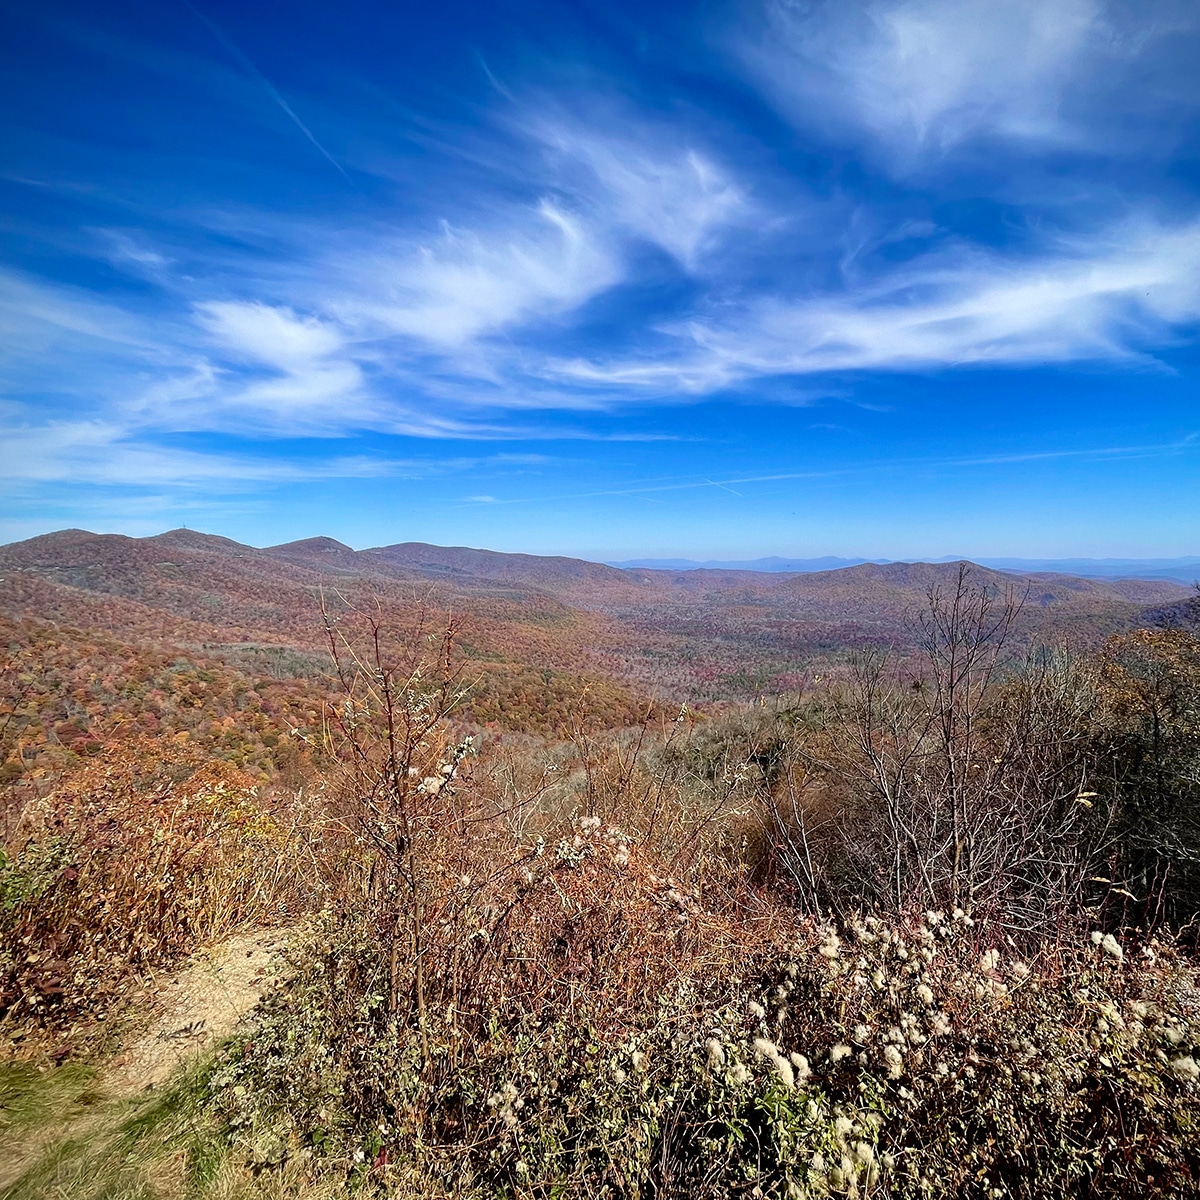 The view from a lookout on the Blue Ridge Parkway in North Carolina.